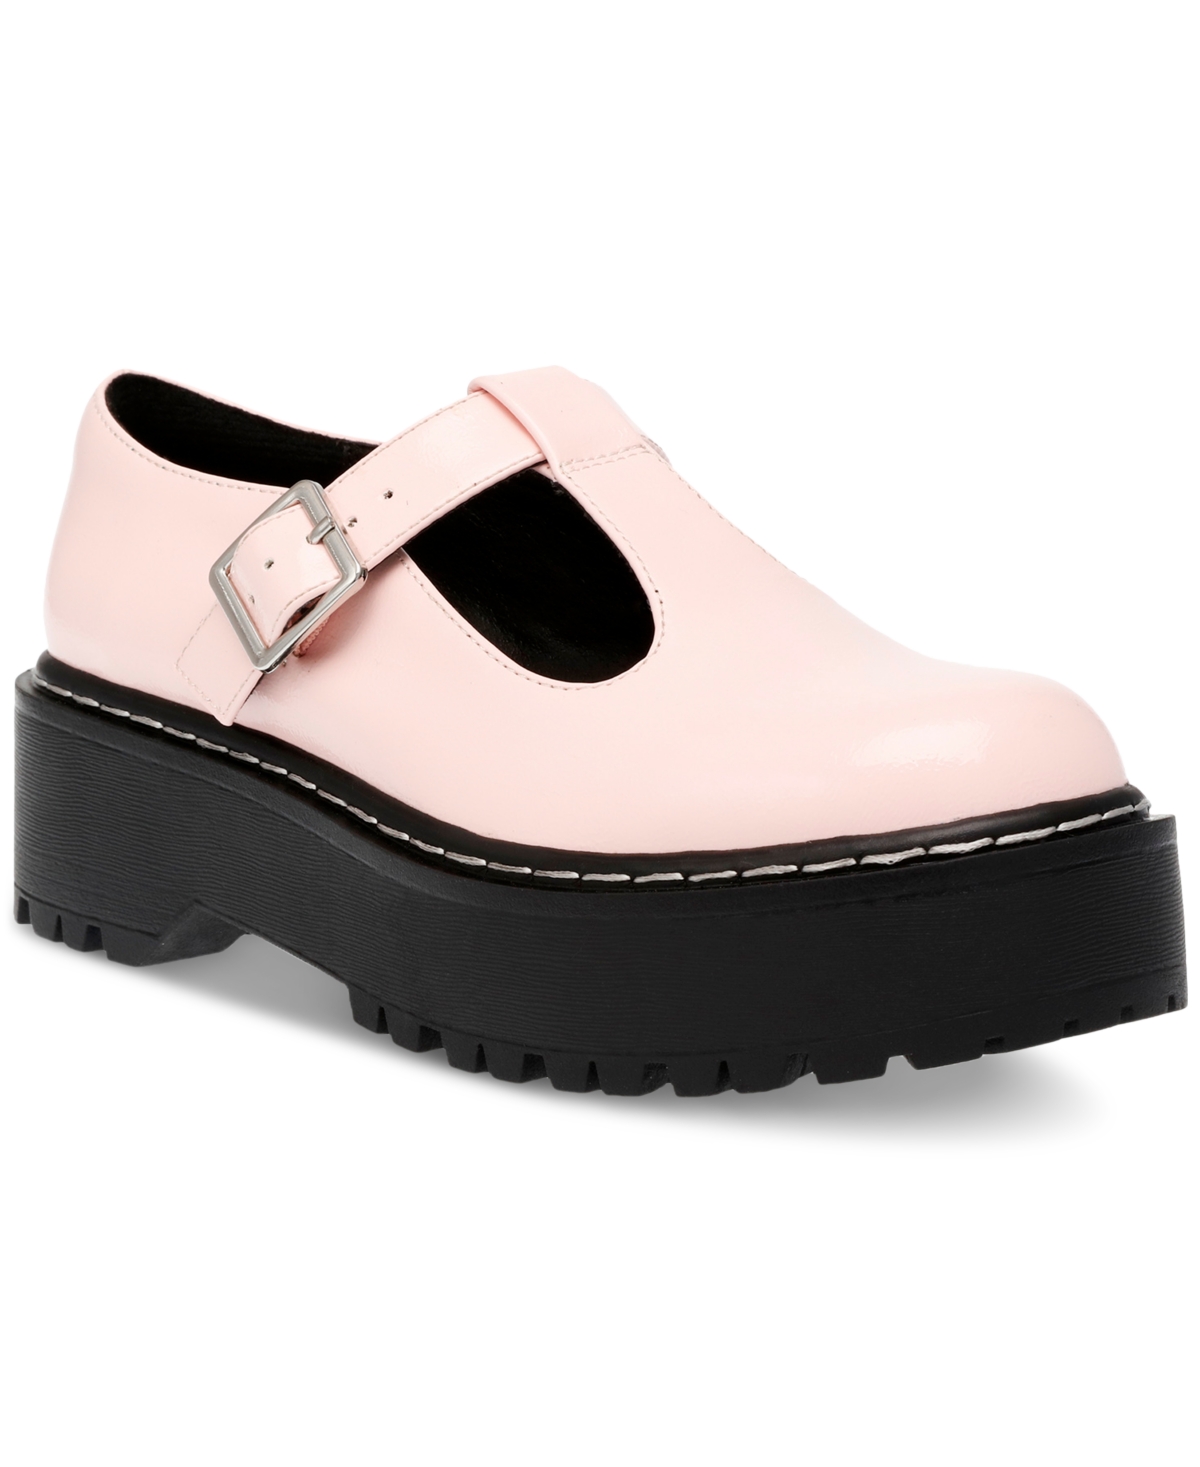 Amalie T-Strap Mary Jane Flats, Created for Macy's - Pink Patent